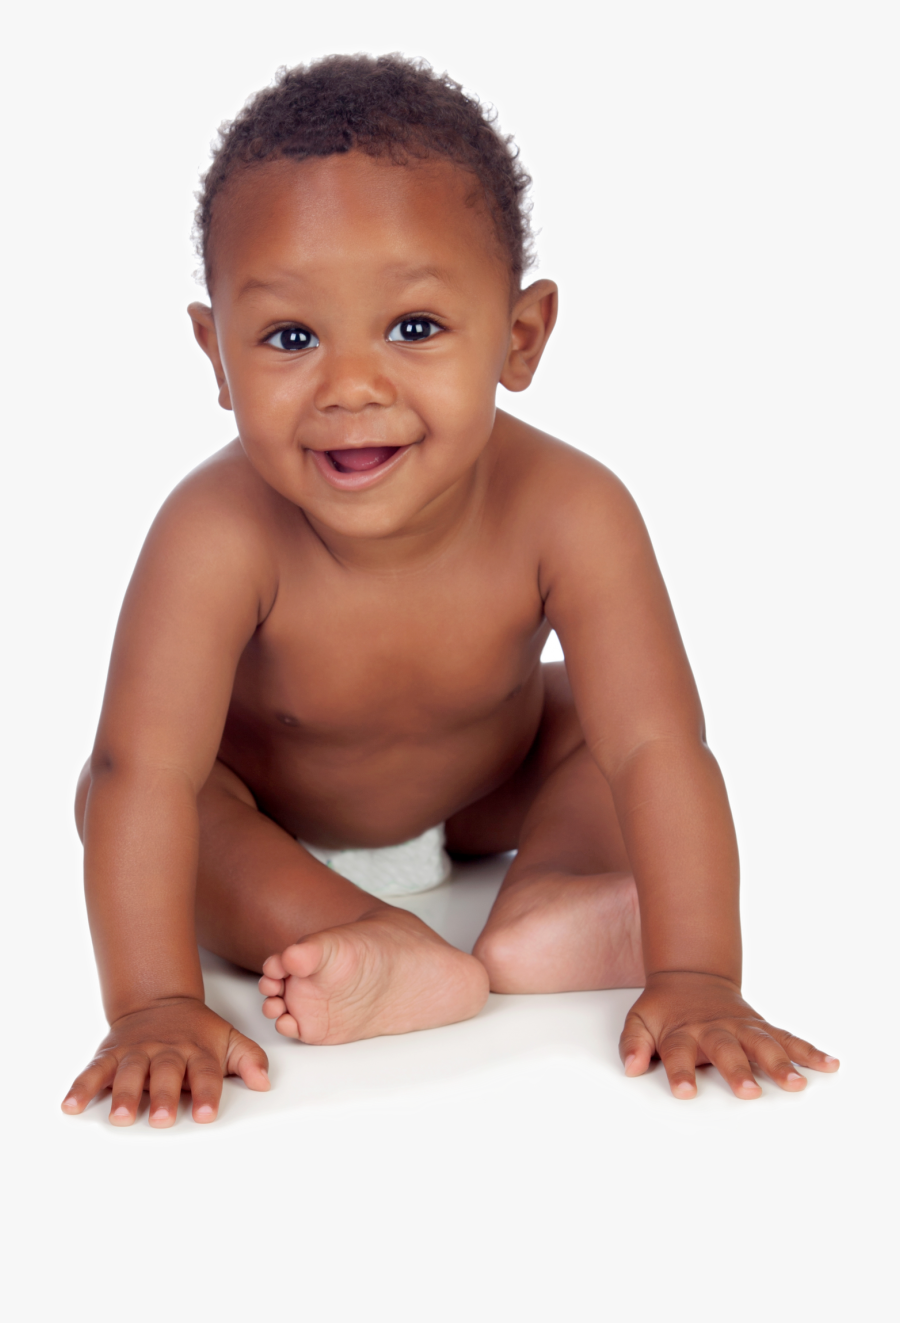 Black Baby Png - Happy African Babies, Transparent Clipart